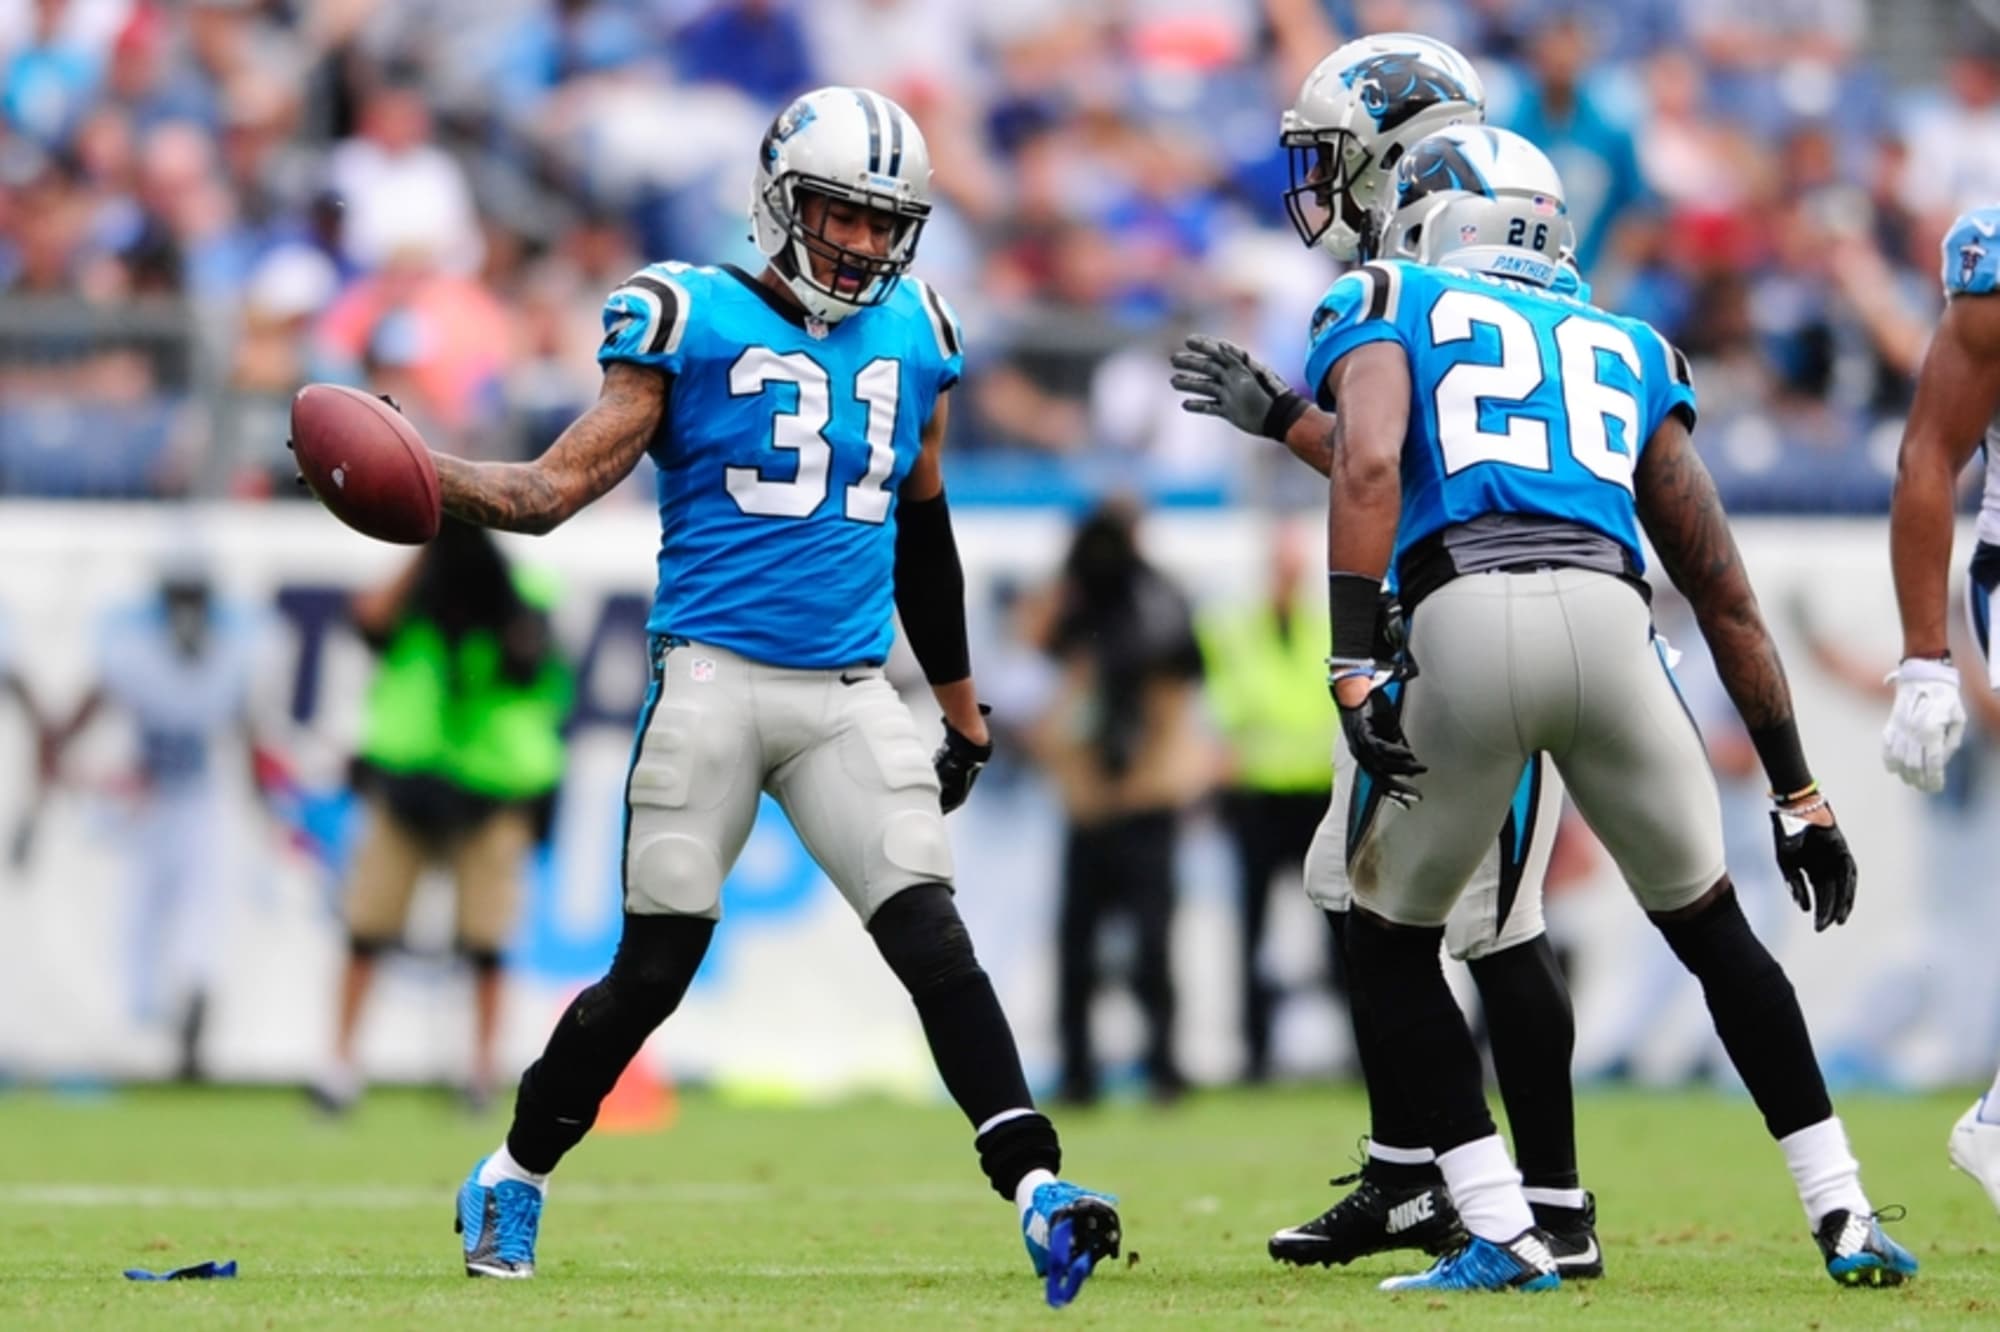 Carolina Panthers: No Rest on Labor Day Weekend